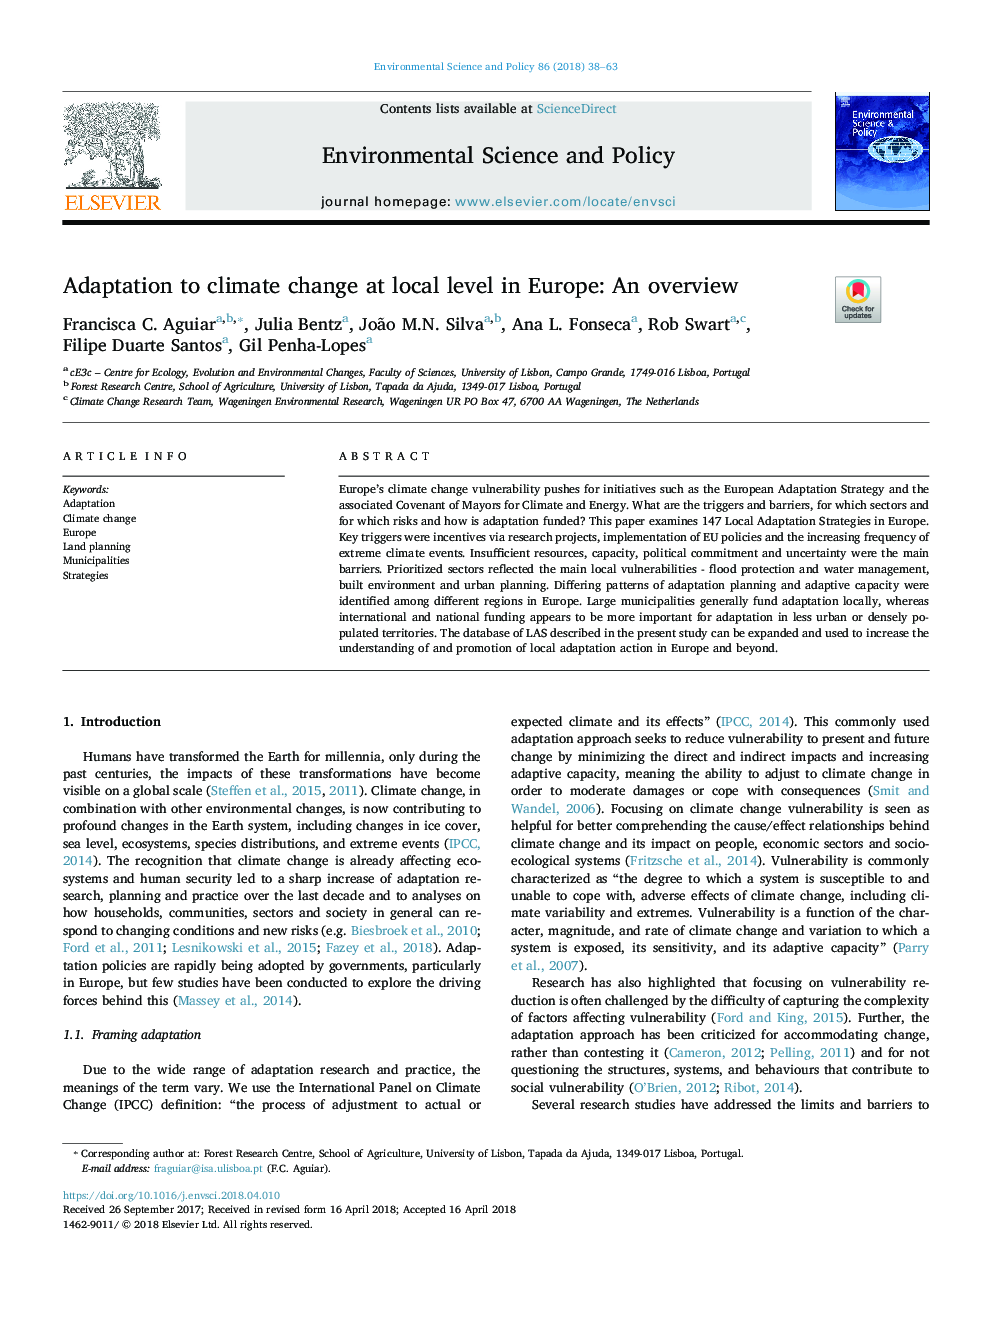 Adaptation to climate change at local level in Europe: An overview